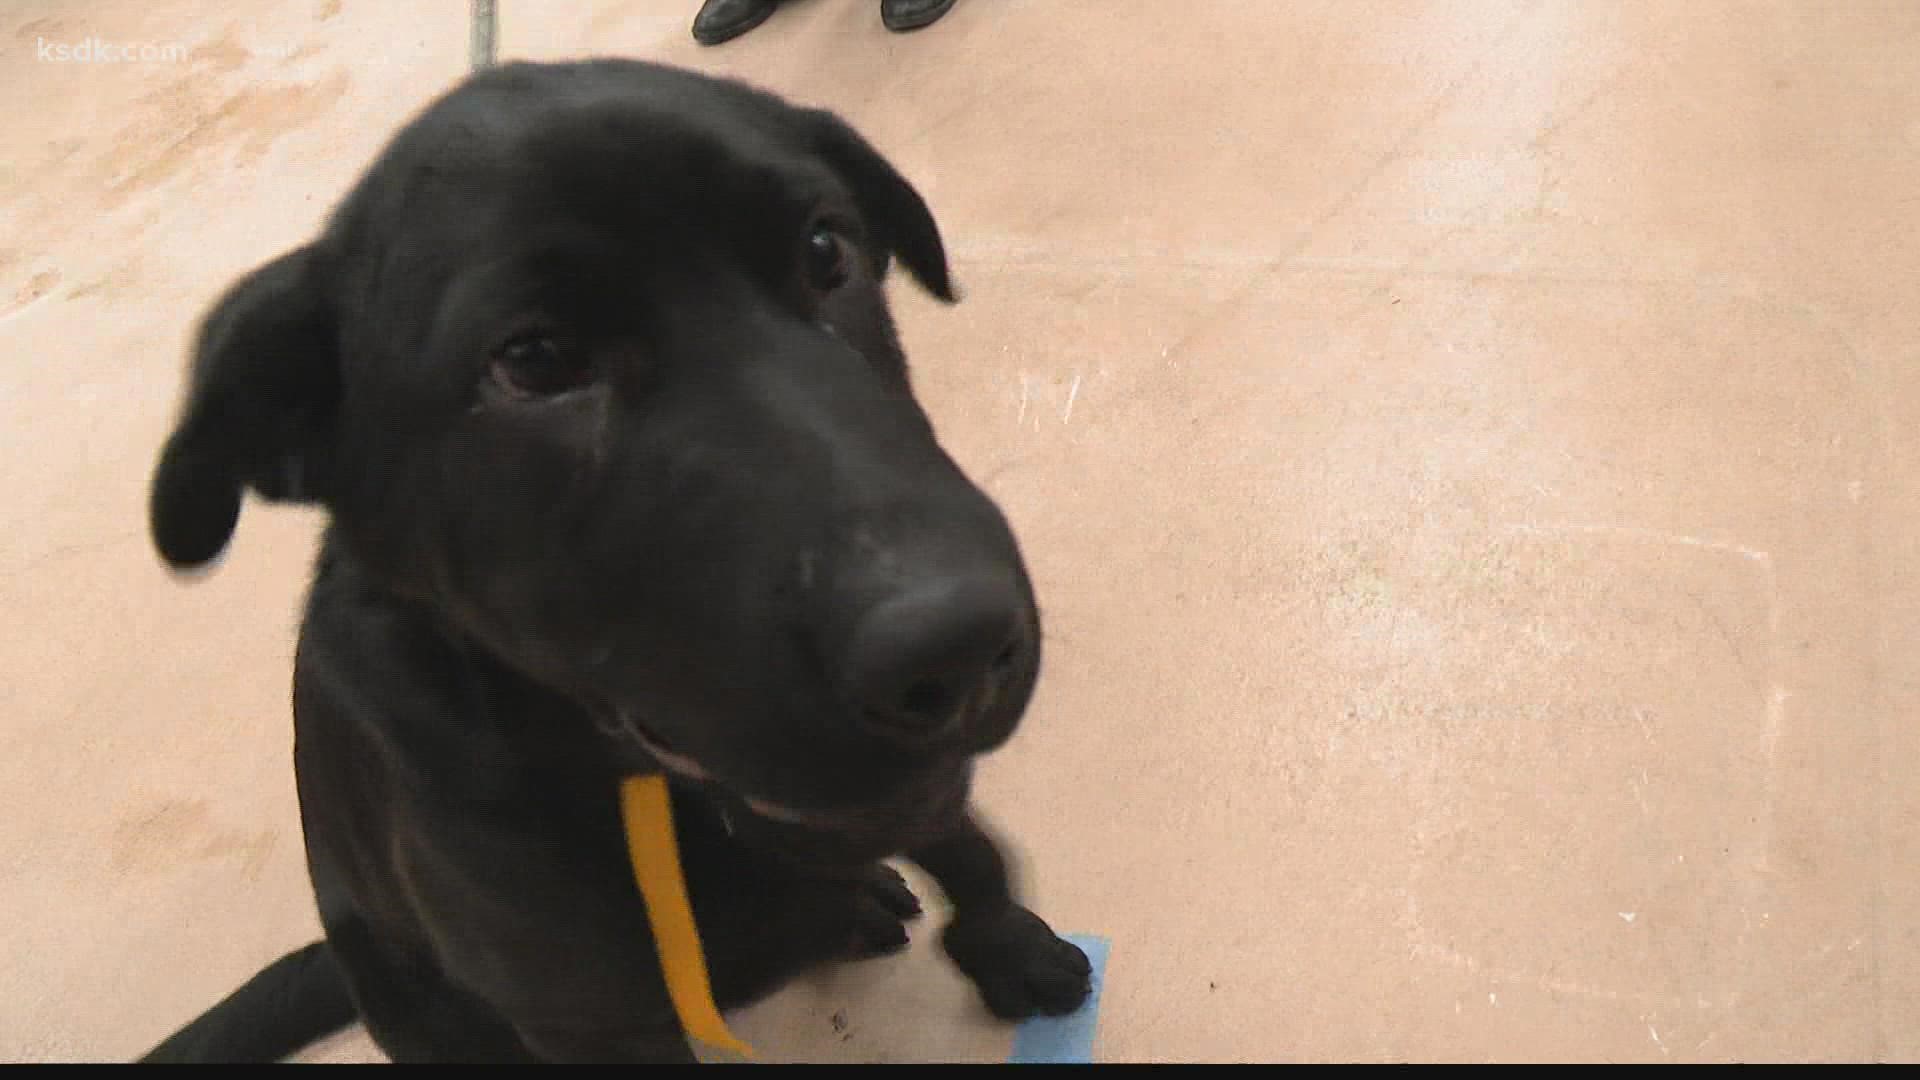 Humane Society of Missouri's rescue team is expected to bring 16 dogs, who will be up for adoption in the coming days